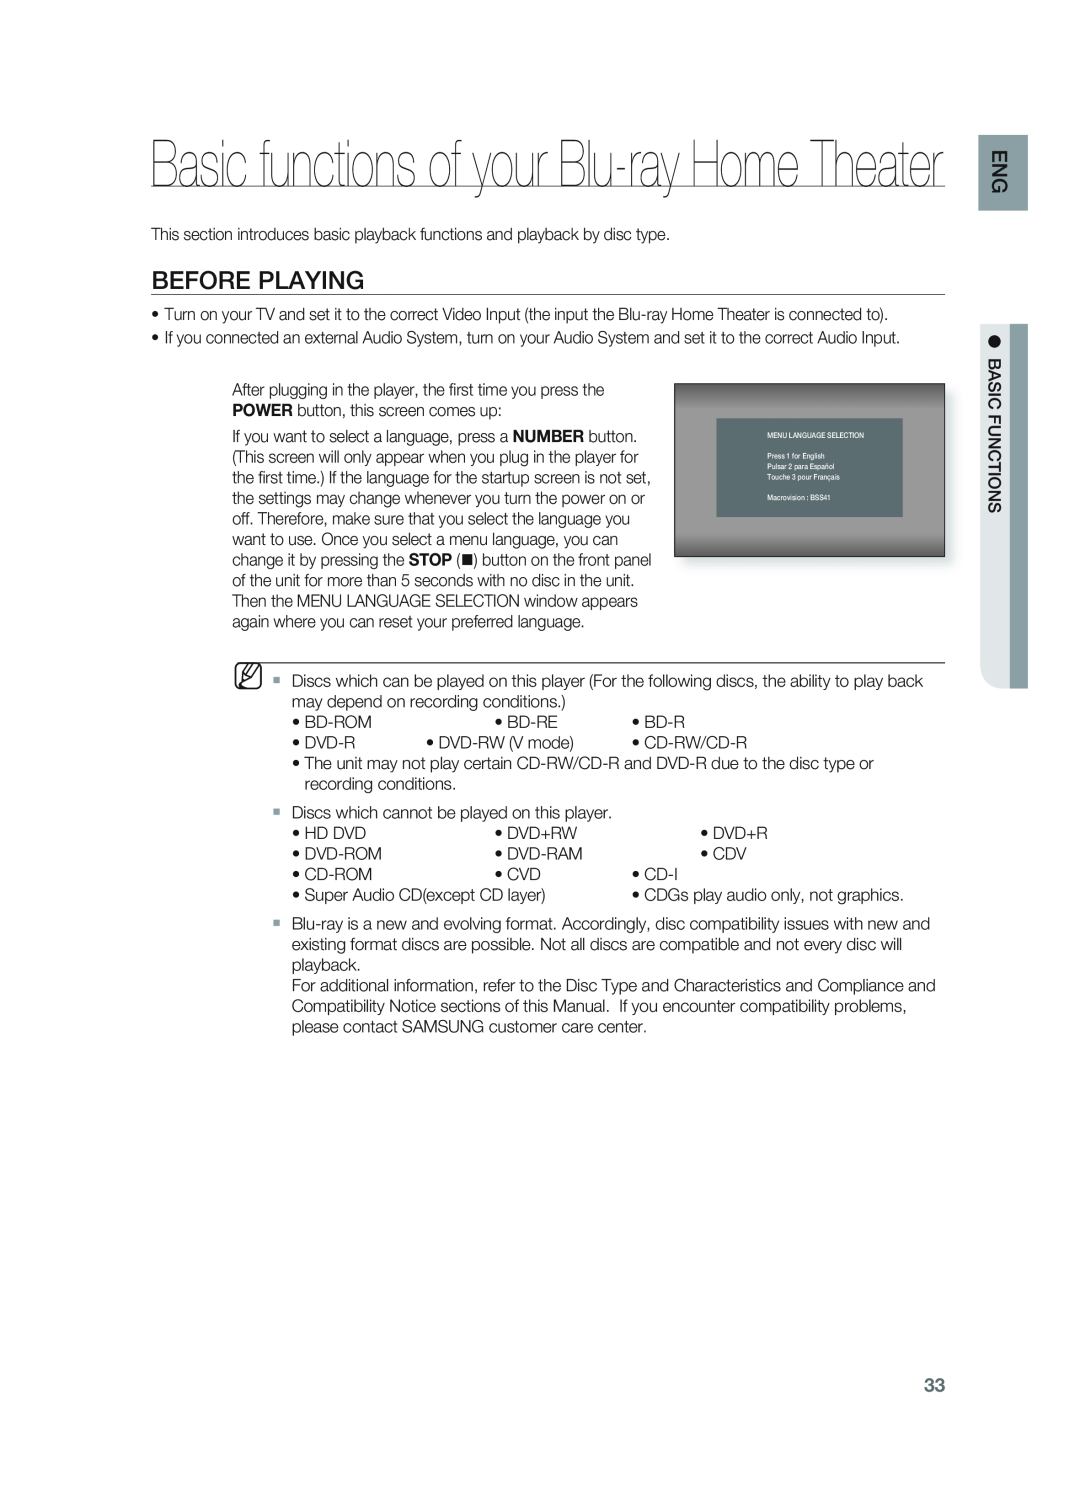 Samsung HT-BD1252, HT-BD1255 user manual Before Playing, Basic functions of your Blu-rayHome Theater 